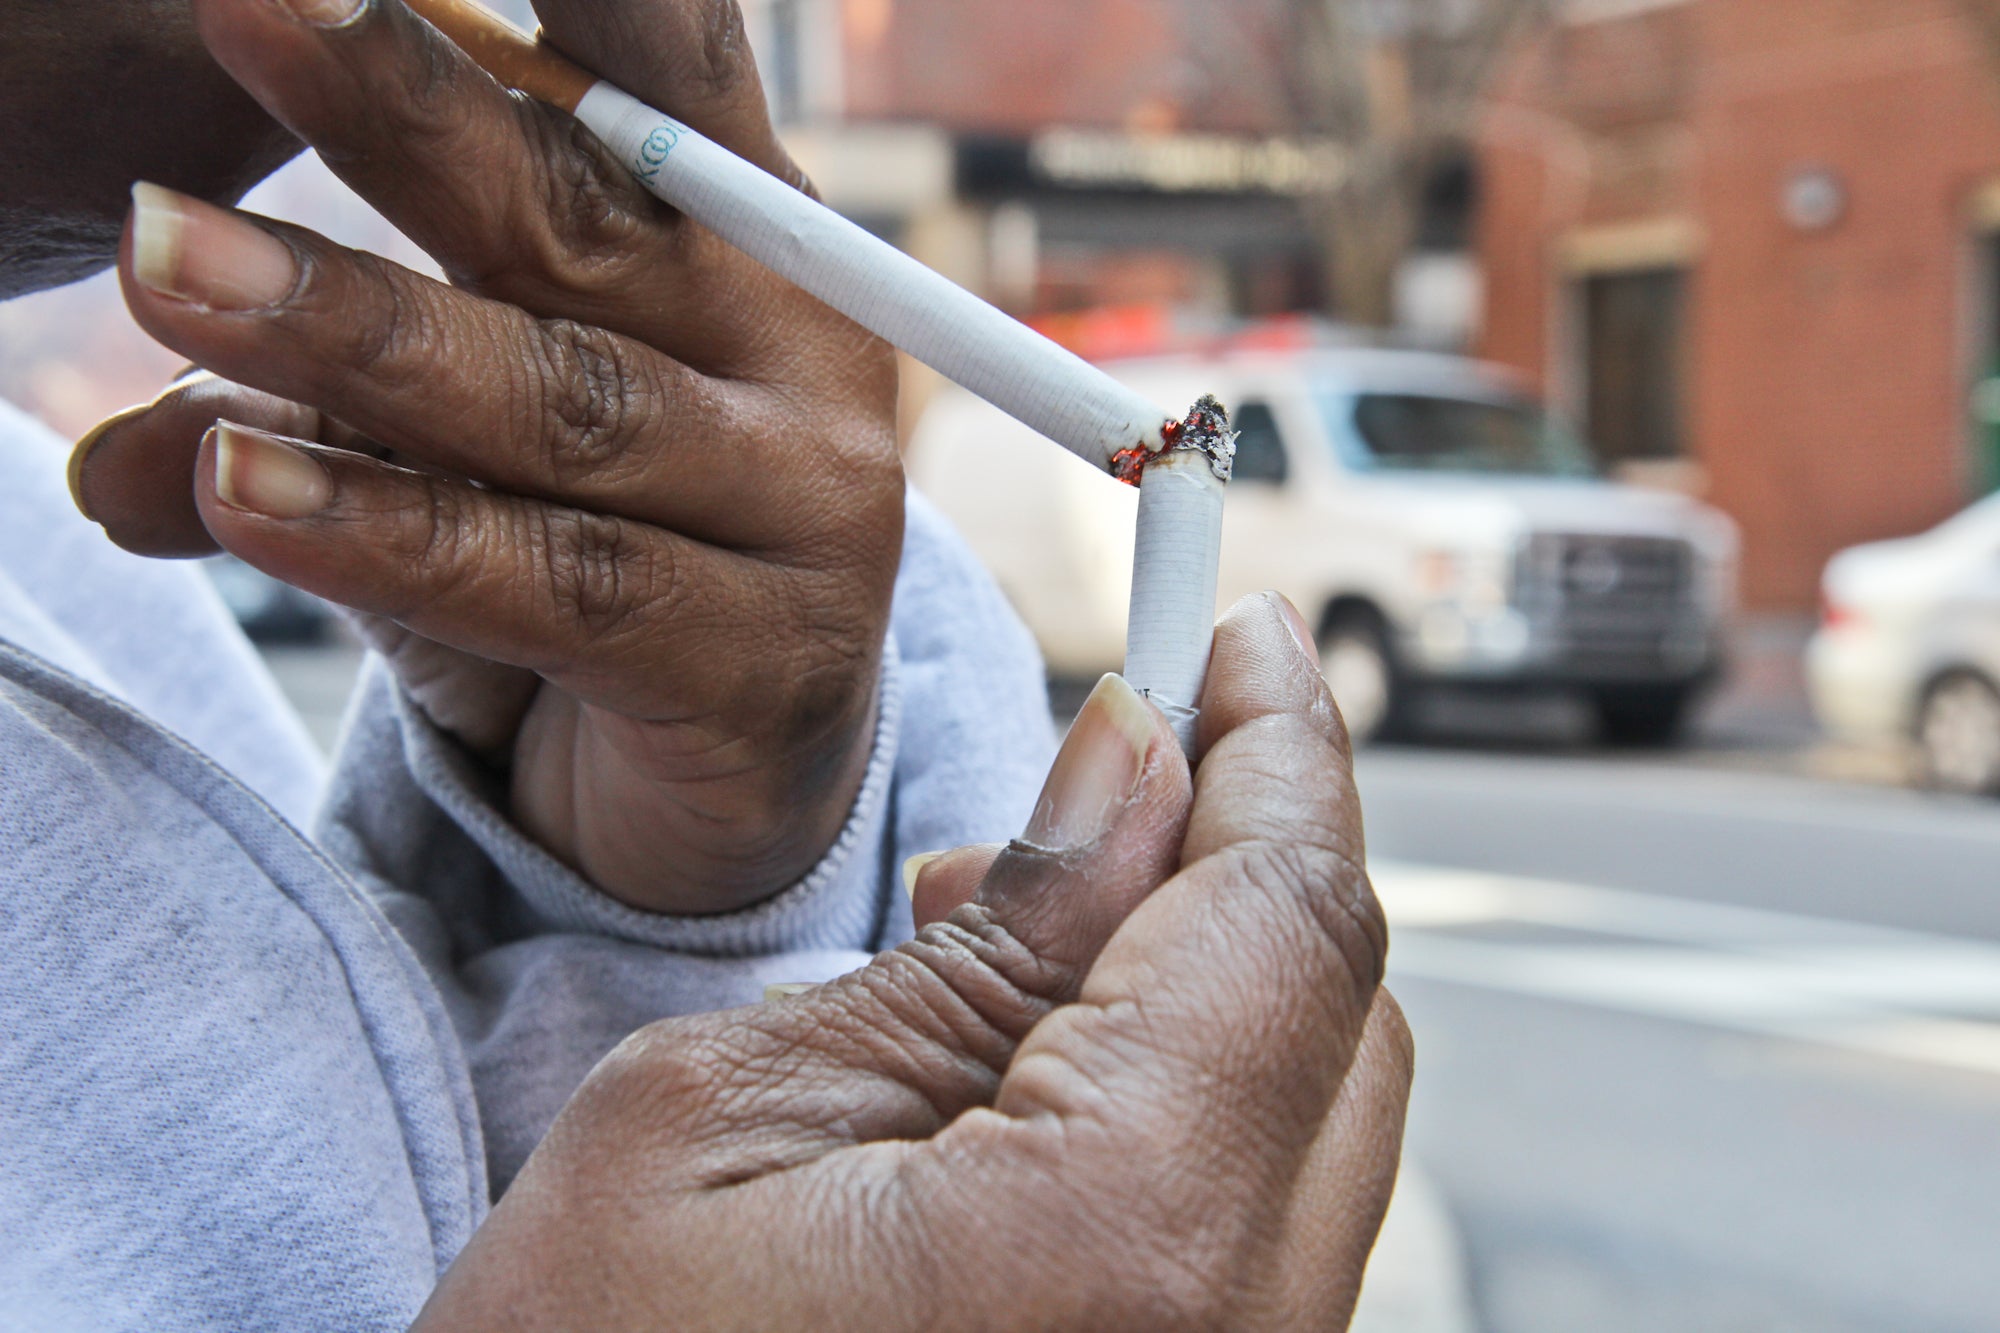  Smoking will be banned in Philadelphia Housing Authority properties starting August 5. (Kimberly Paynter/WHYY) 